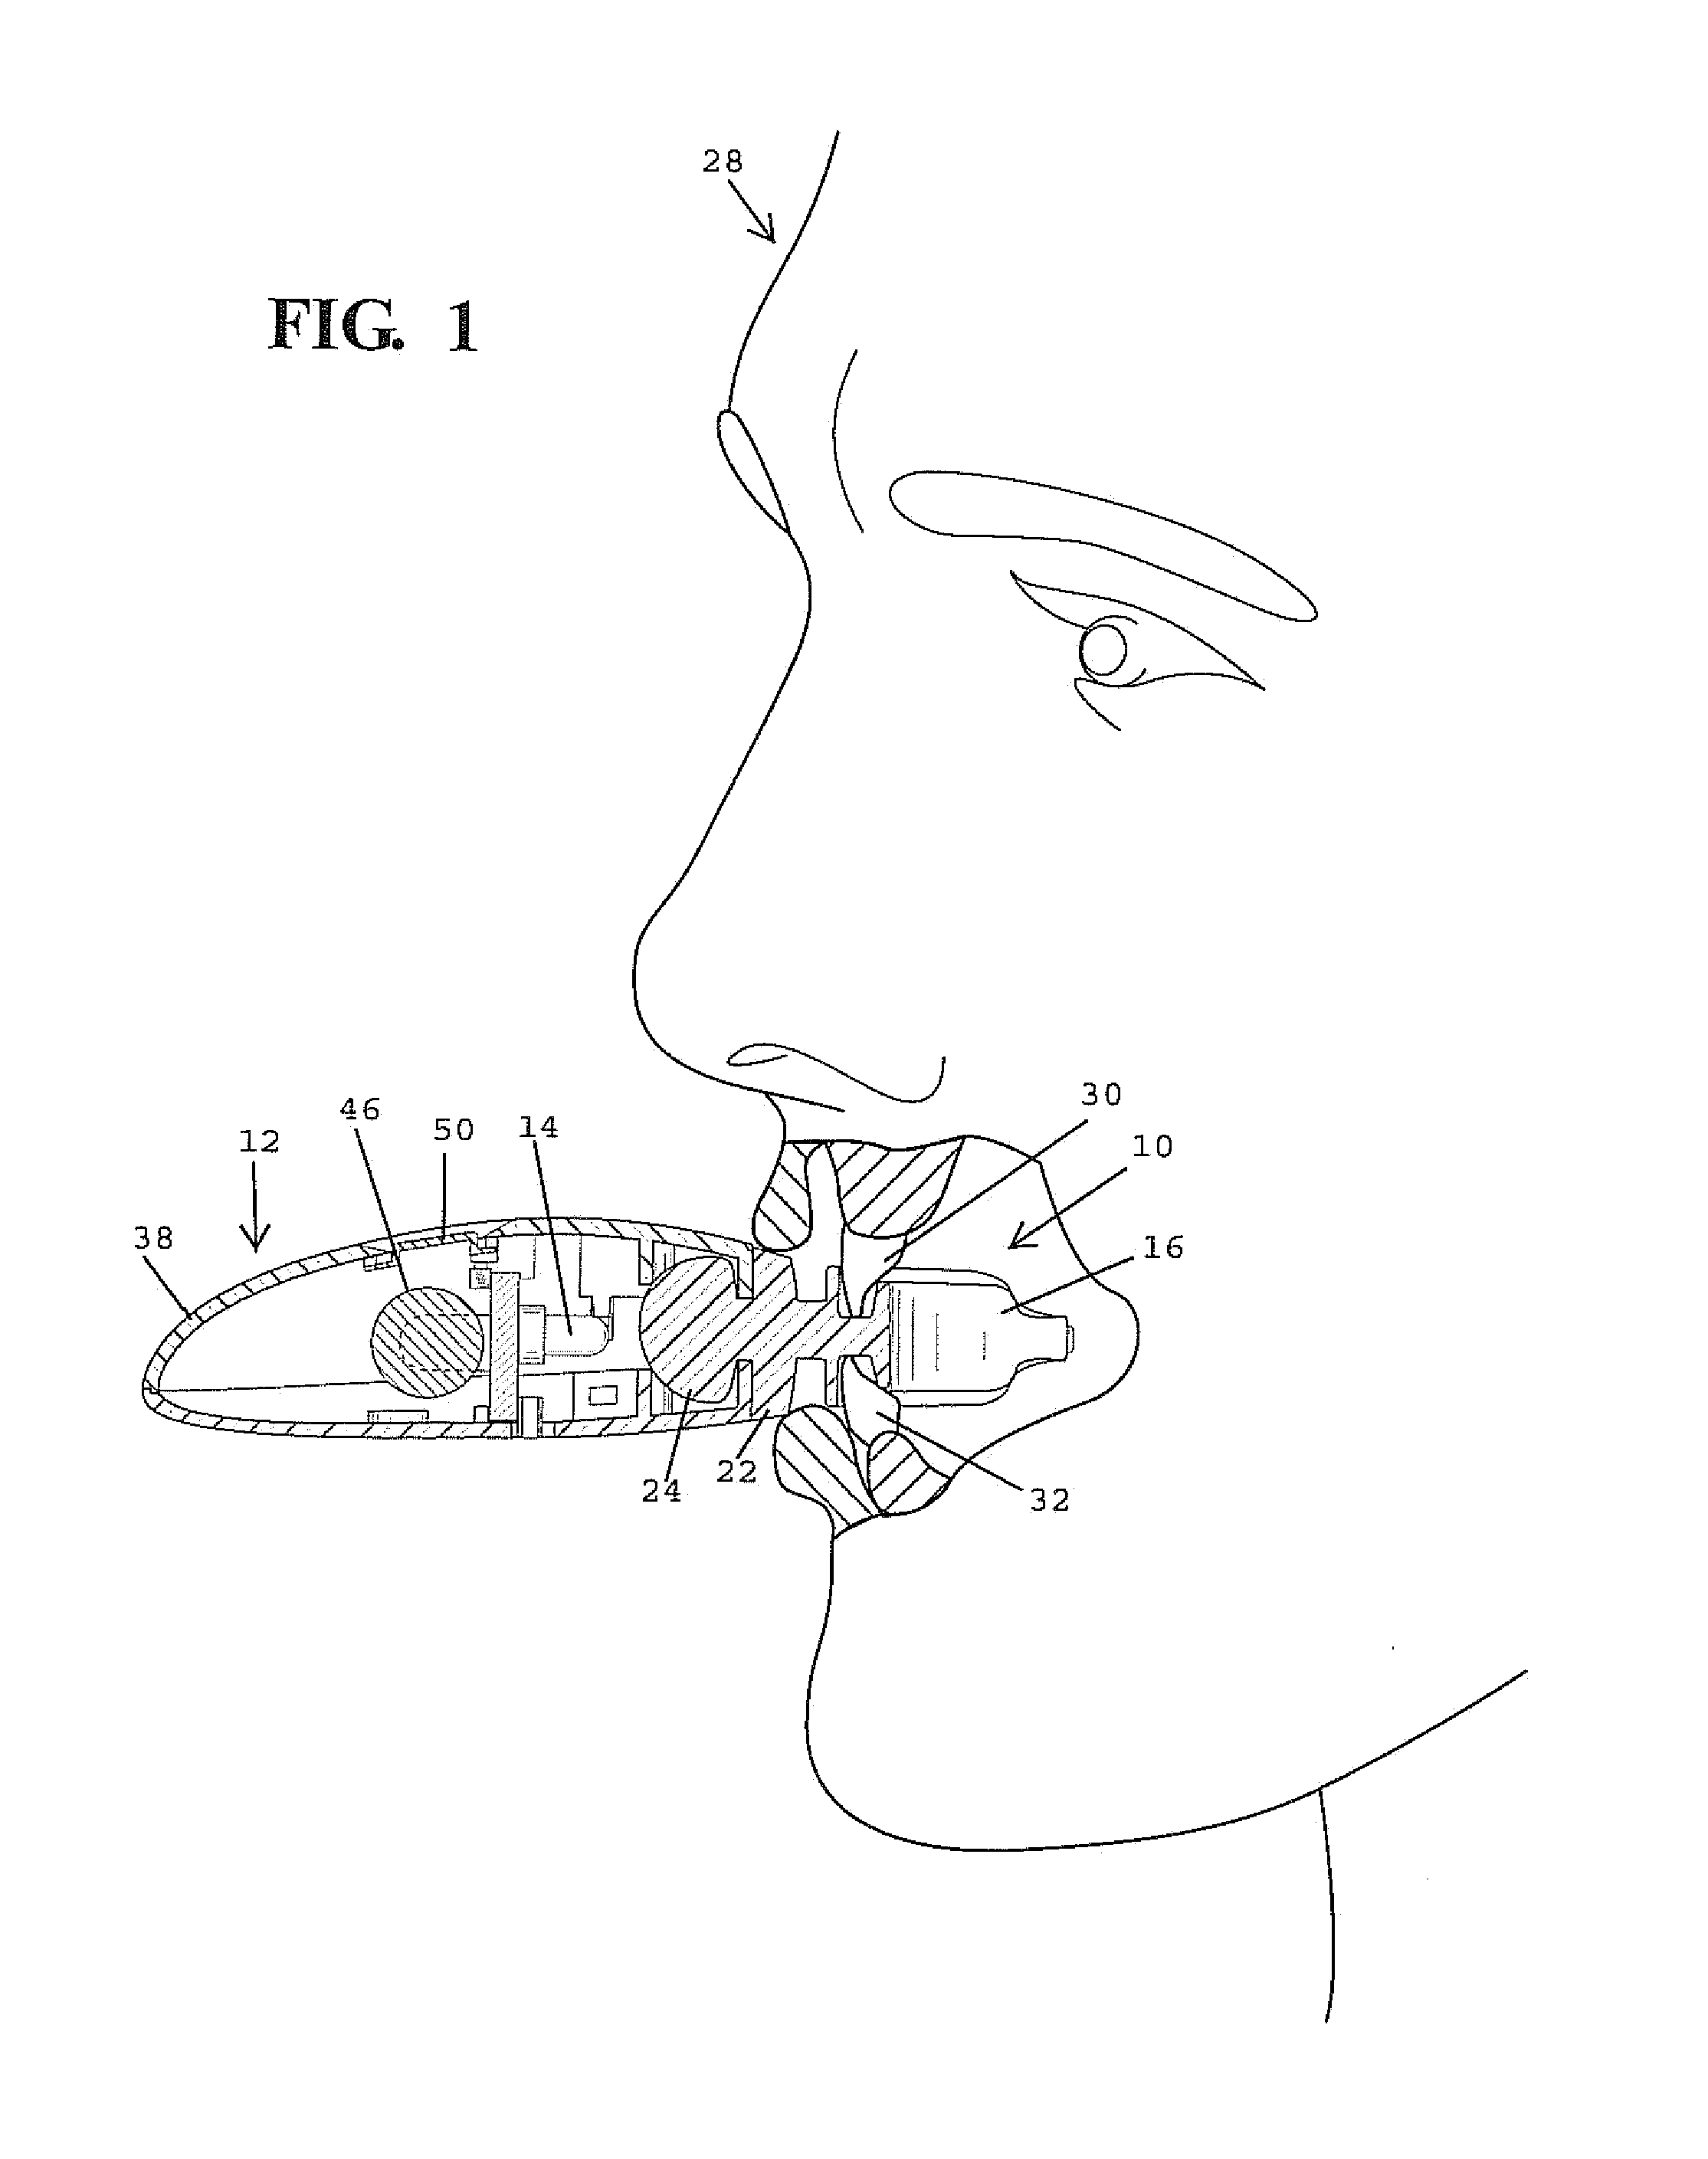 Method and apparatus for whitening teeth